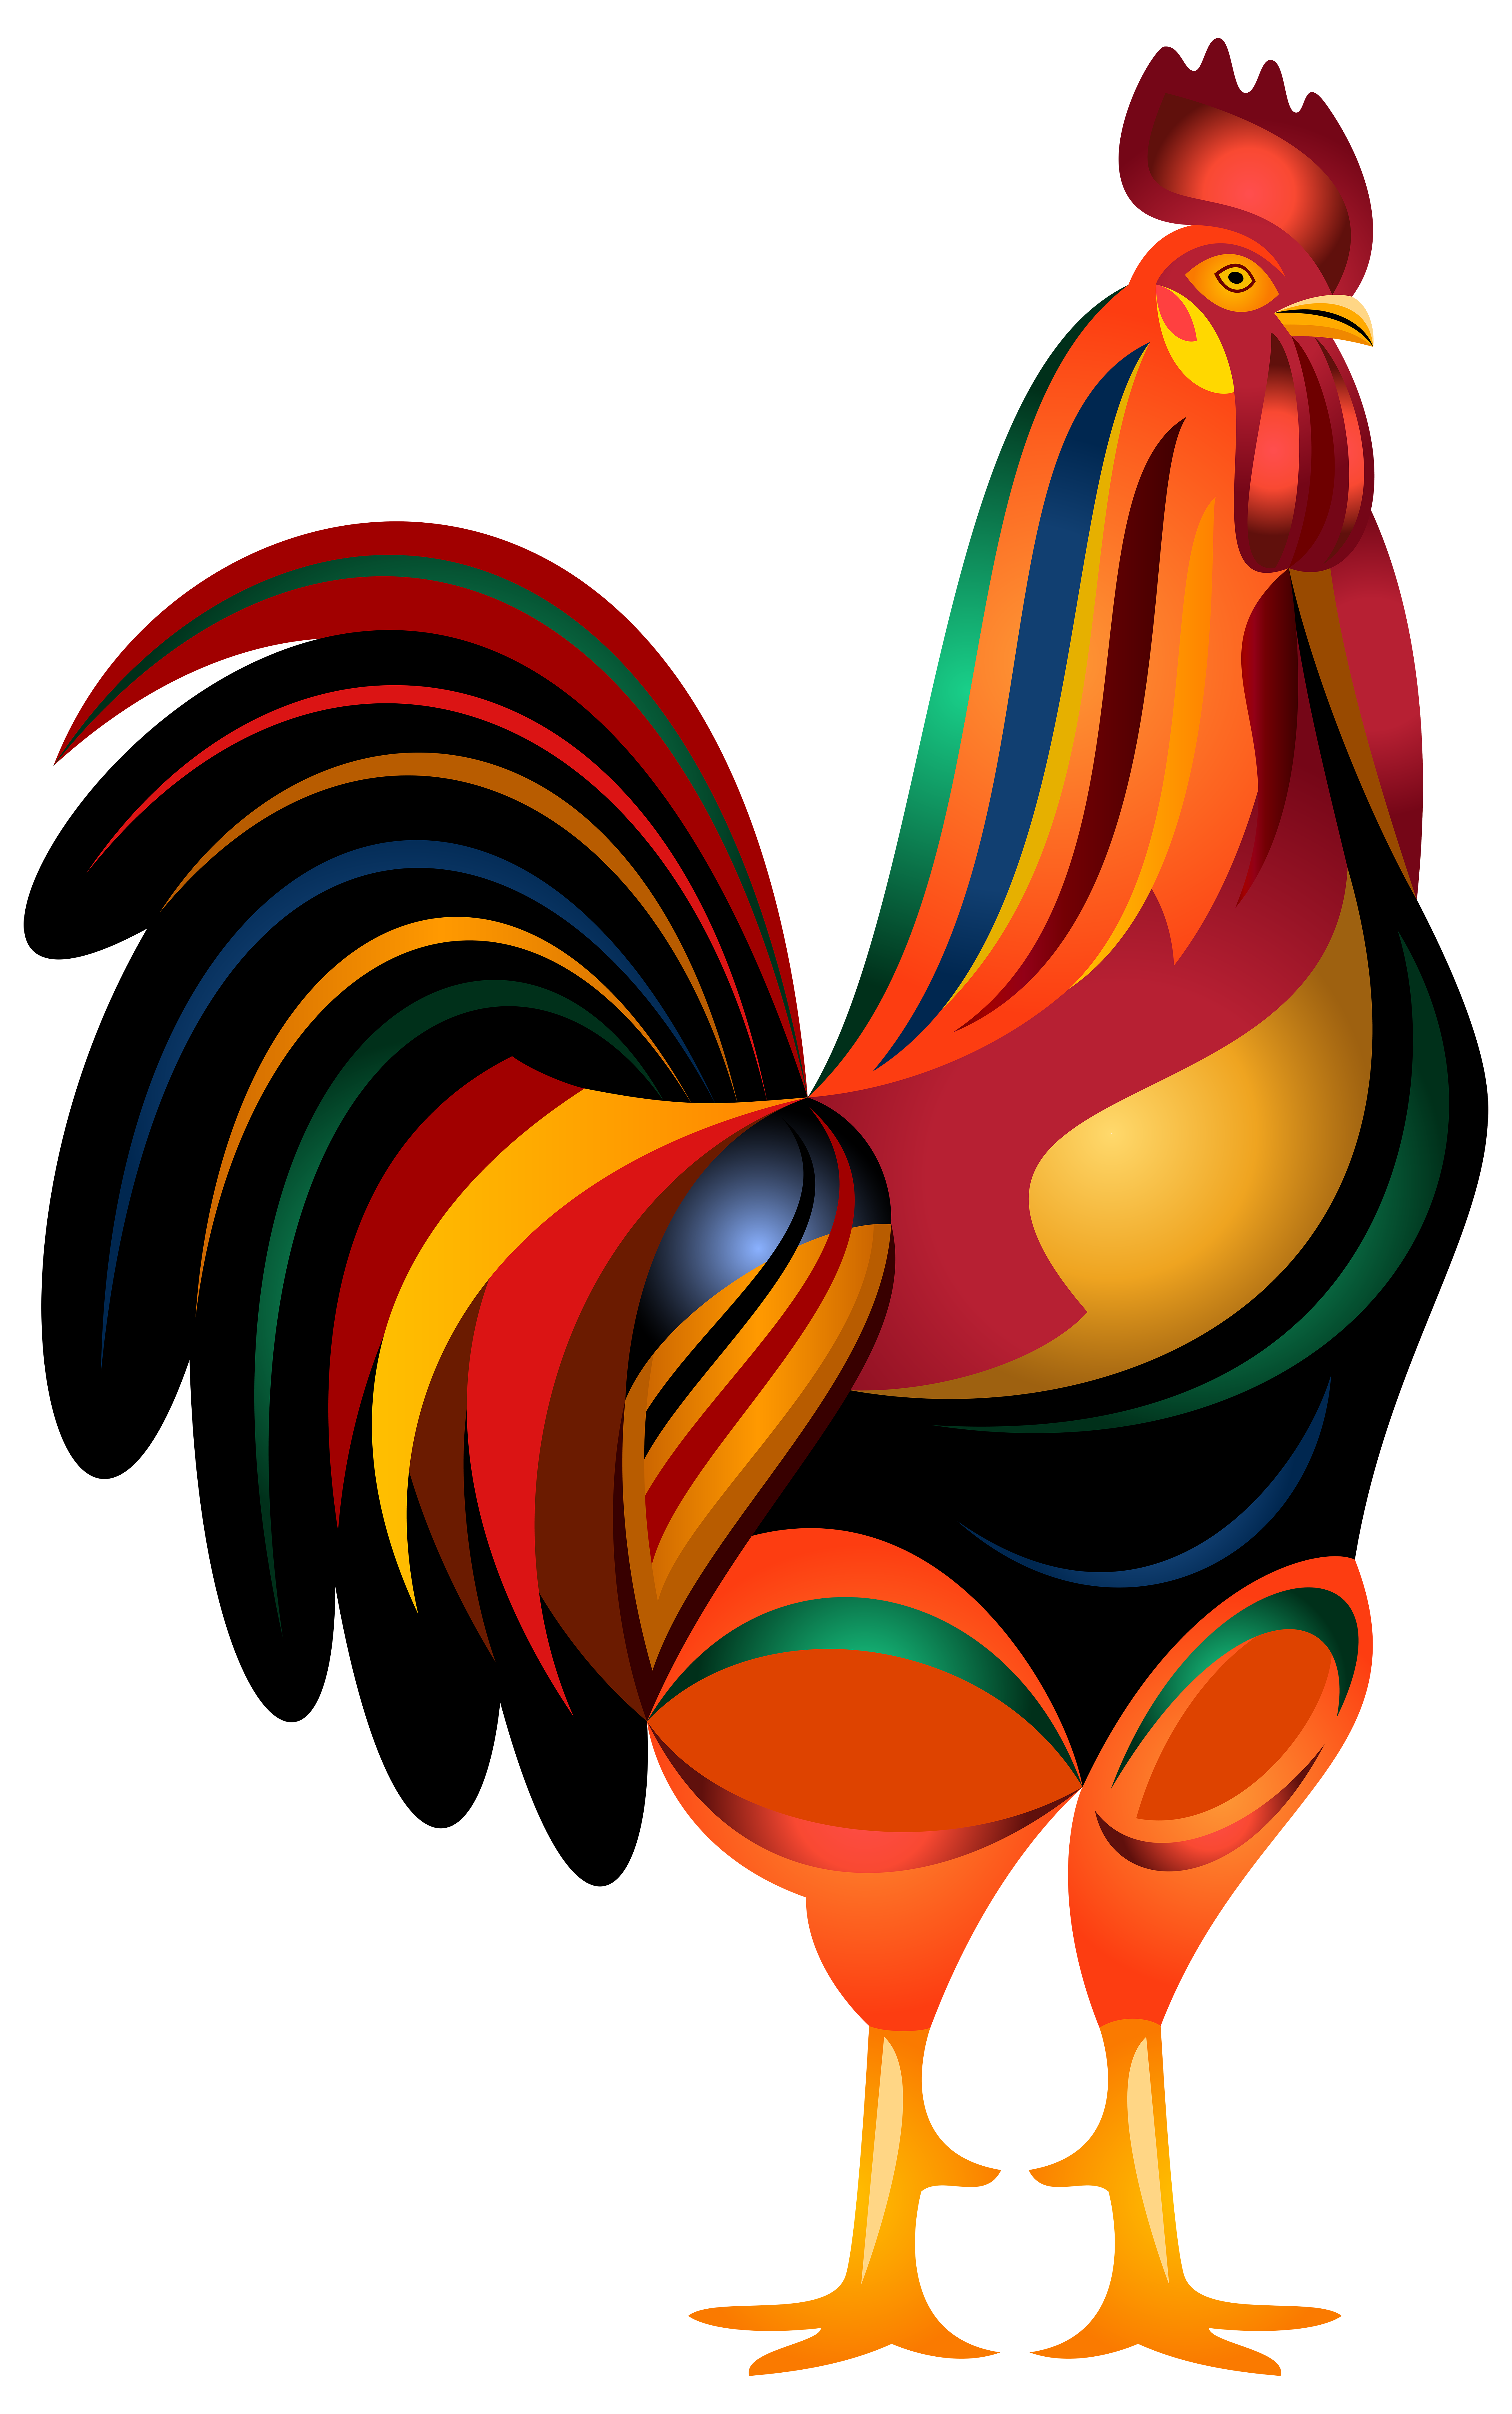 sunset clipart rooster